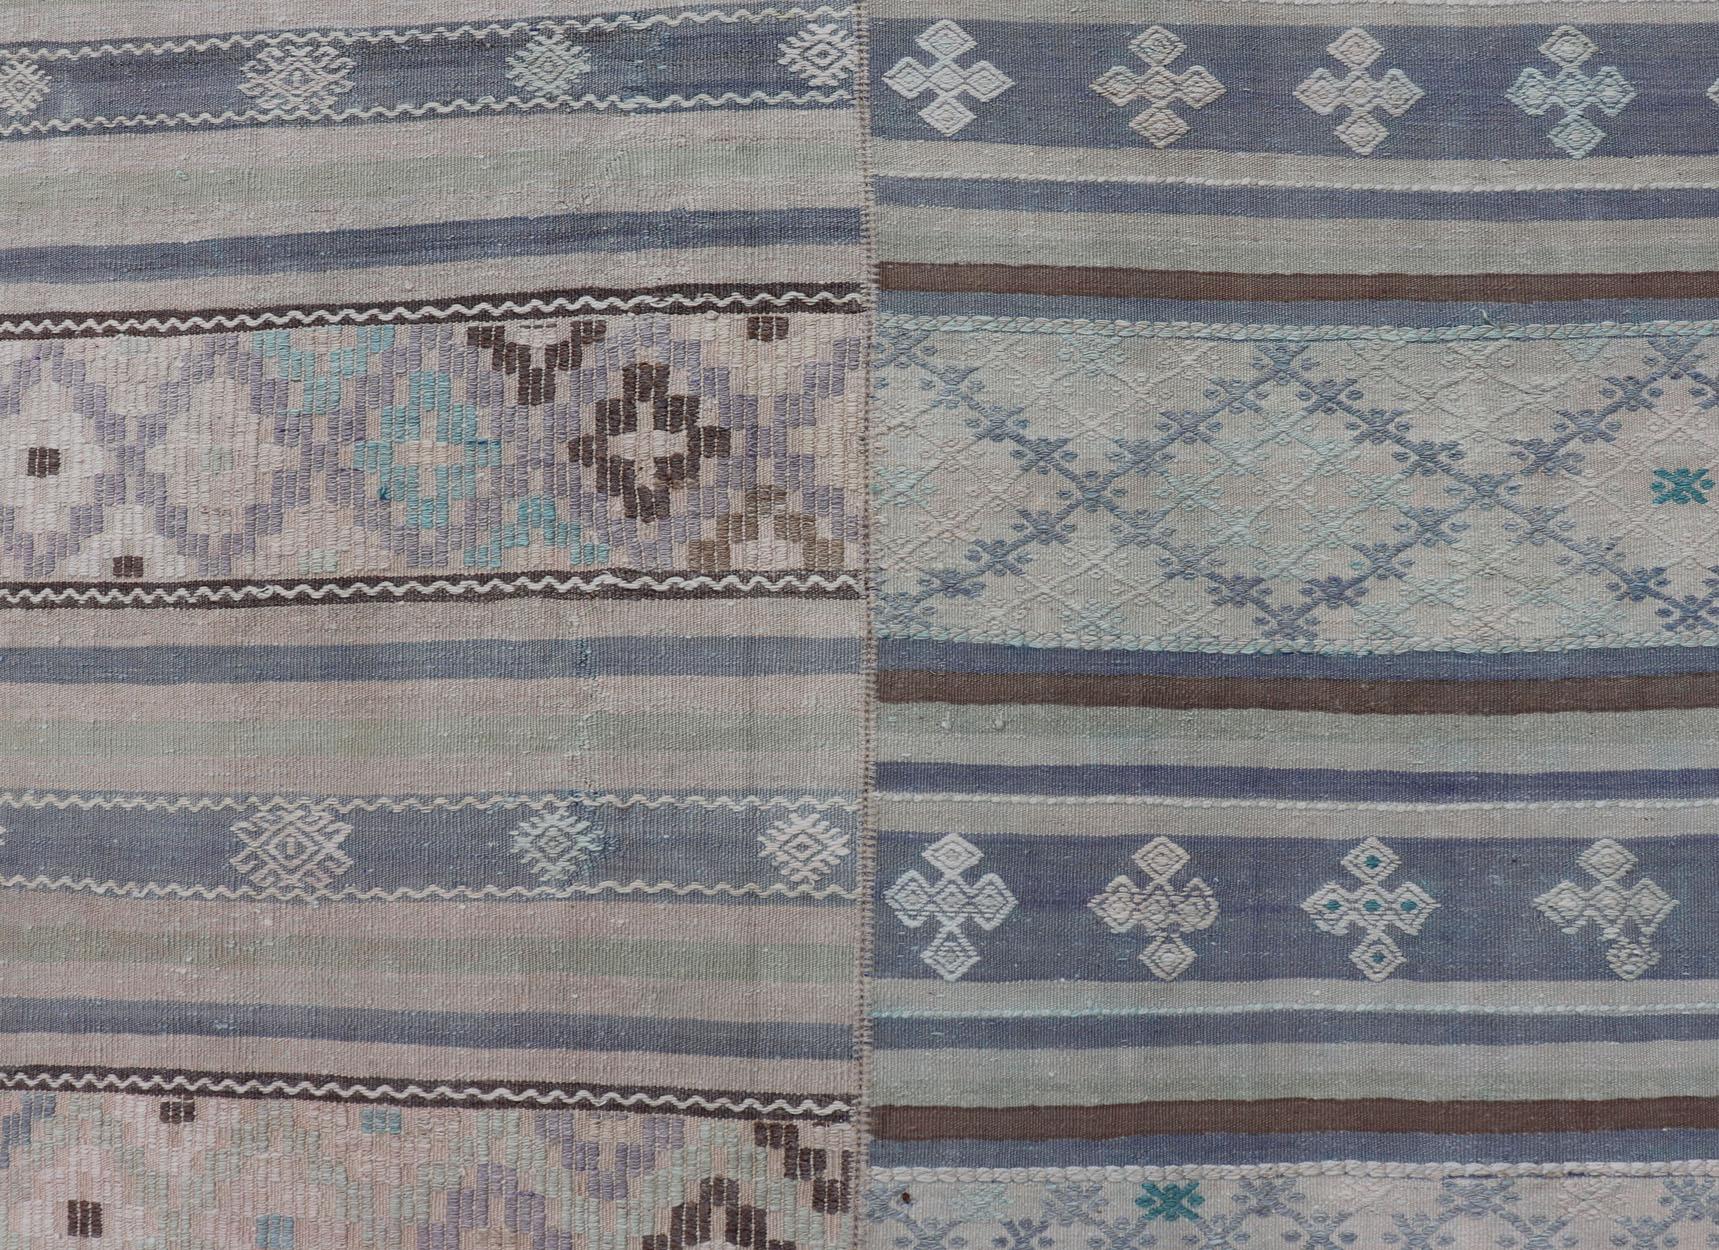 Hand-Woven Square Vintage Neutral Paneled Kilim Flat-Weave in Neutral Muted Tones  For Sale